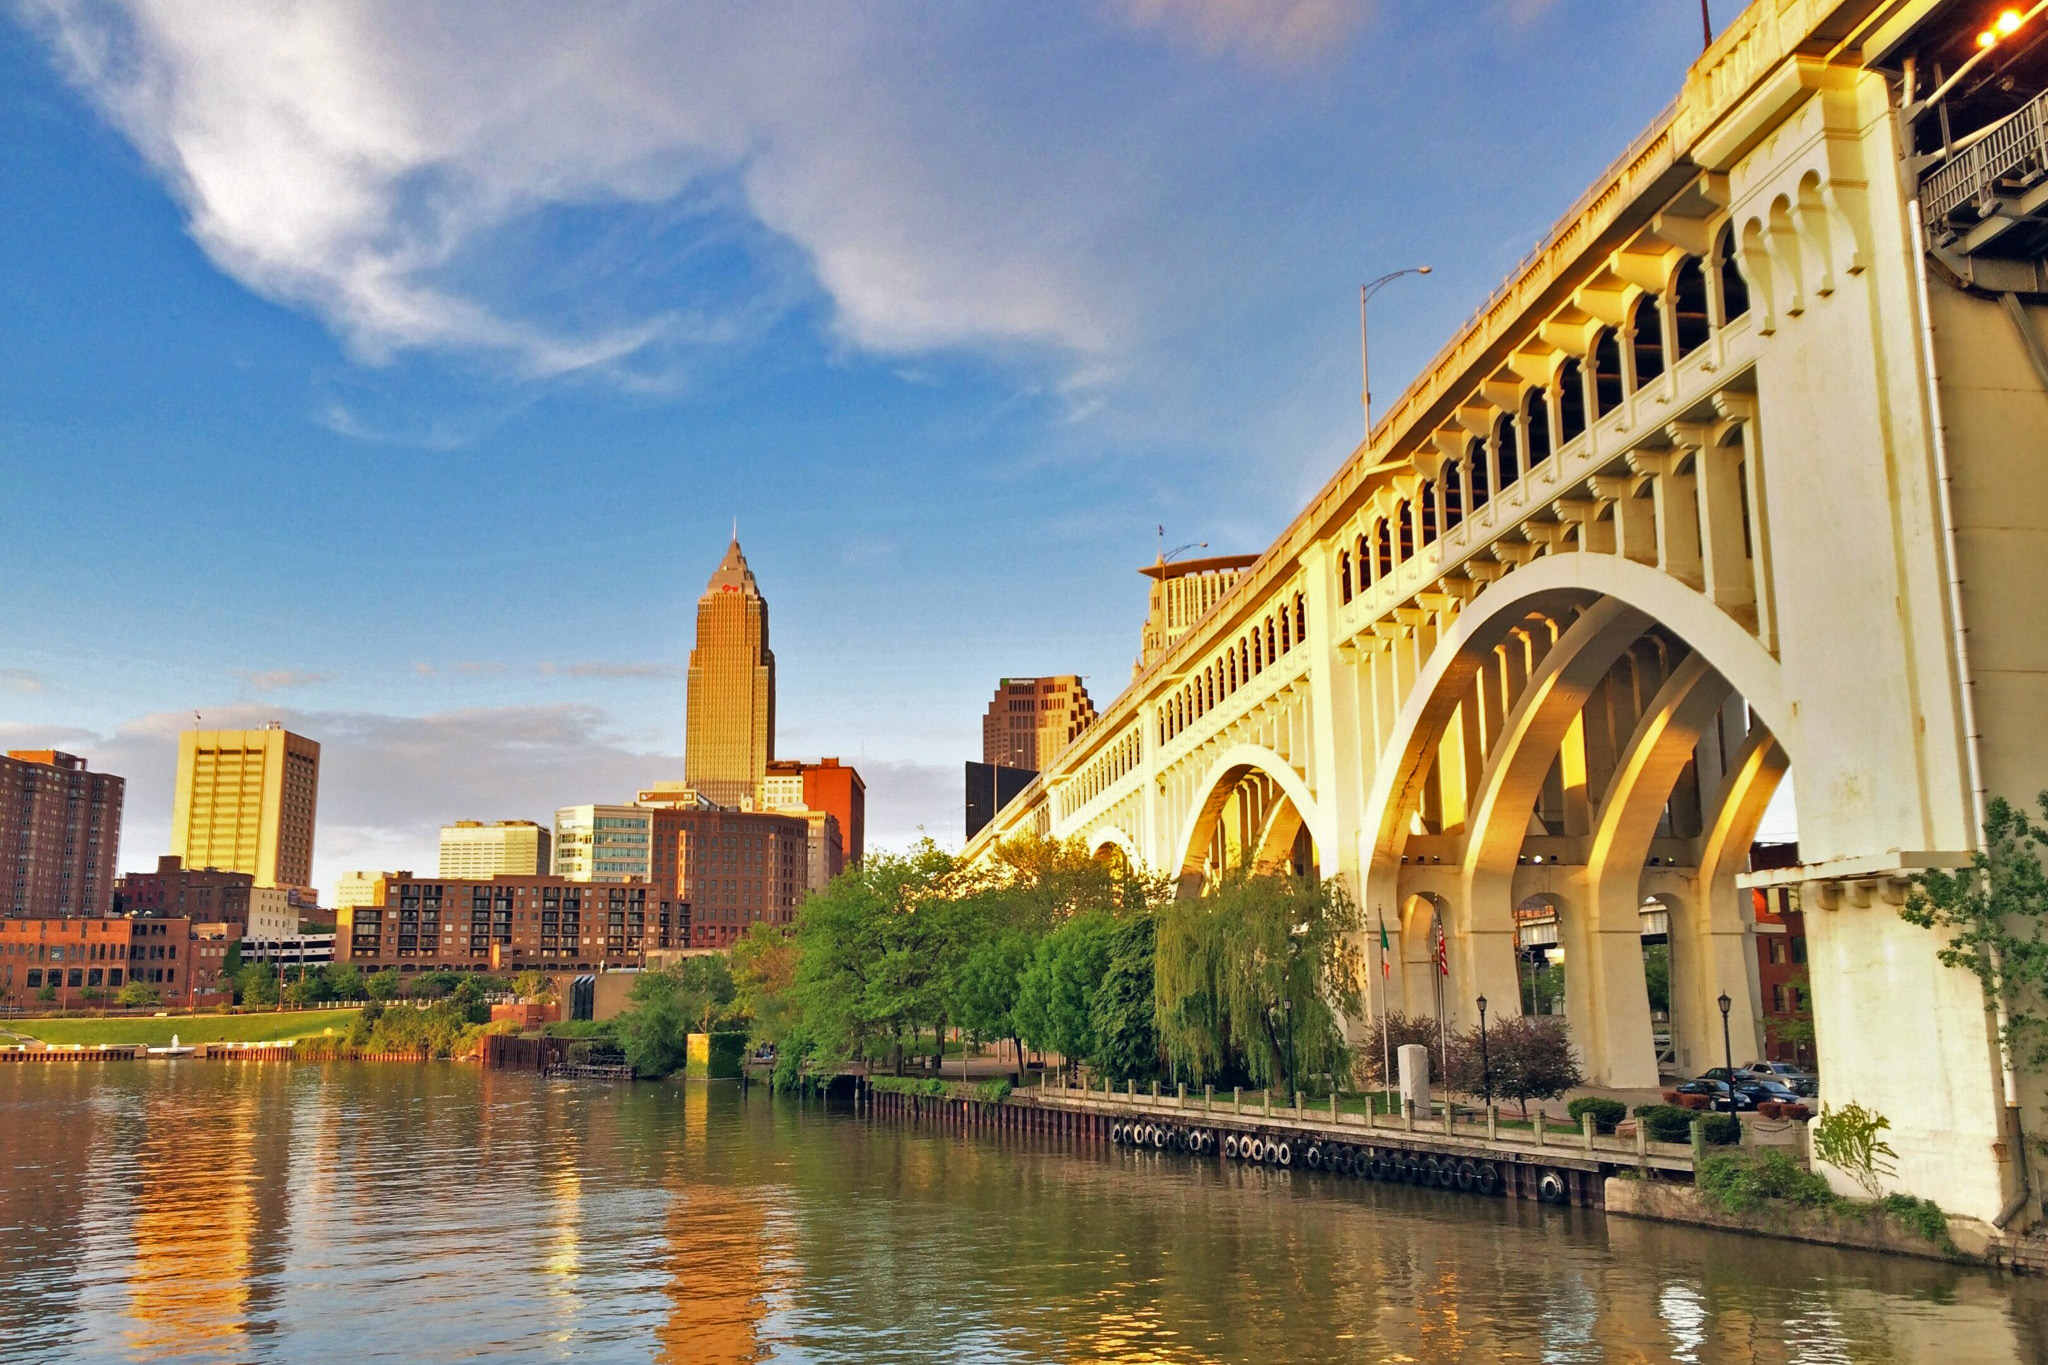 Escape From New York, Buy a Home in Cleveland Instead